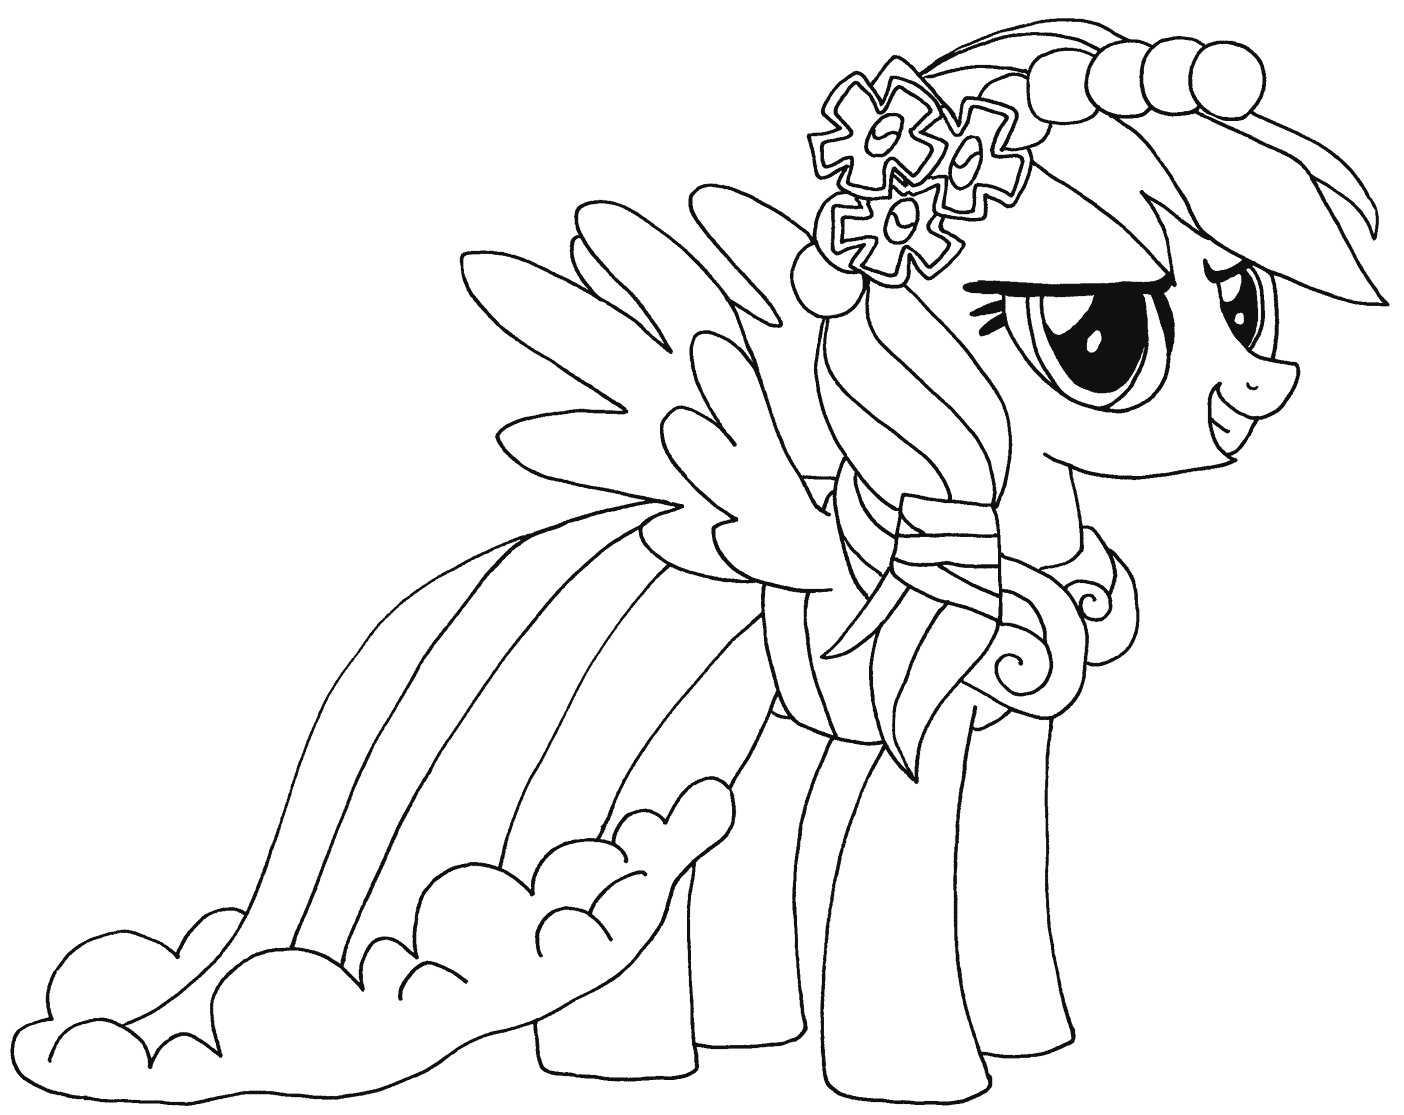 rainbow dash coloring sheets rainbow dash coloring pages to download and print for free coloring rainbow dash sheets 